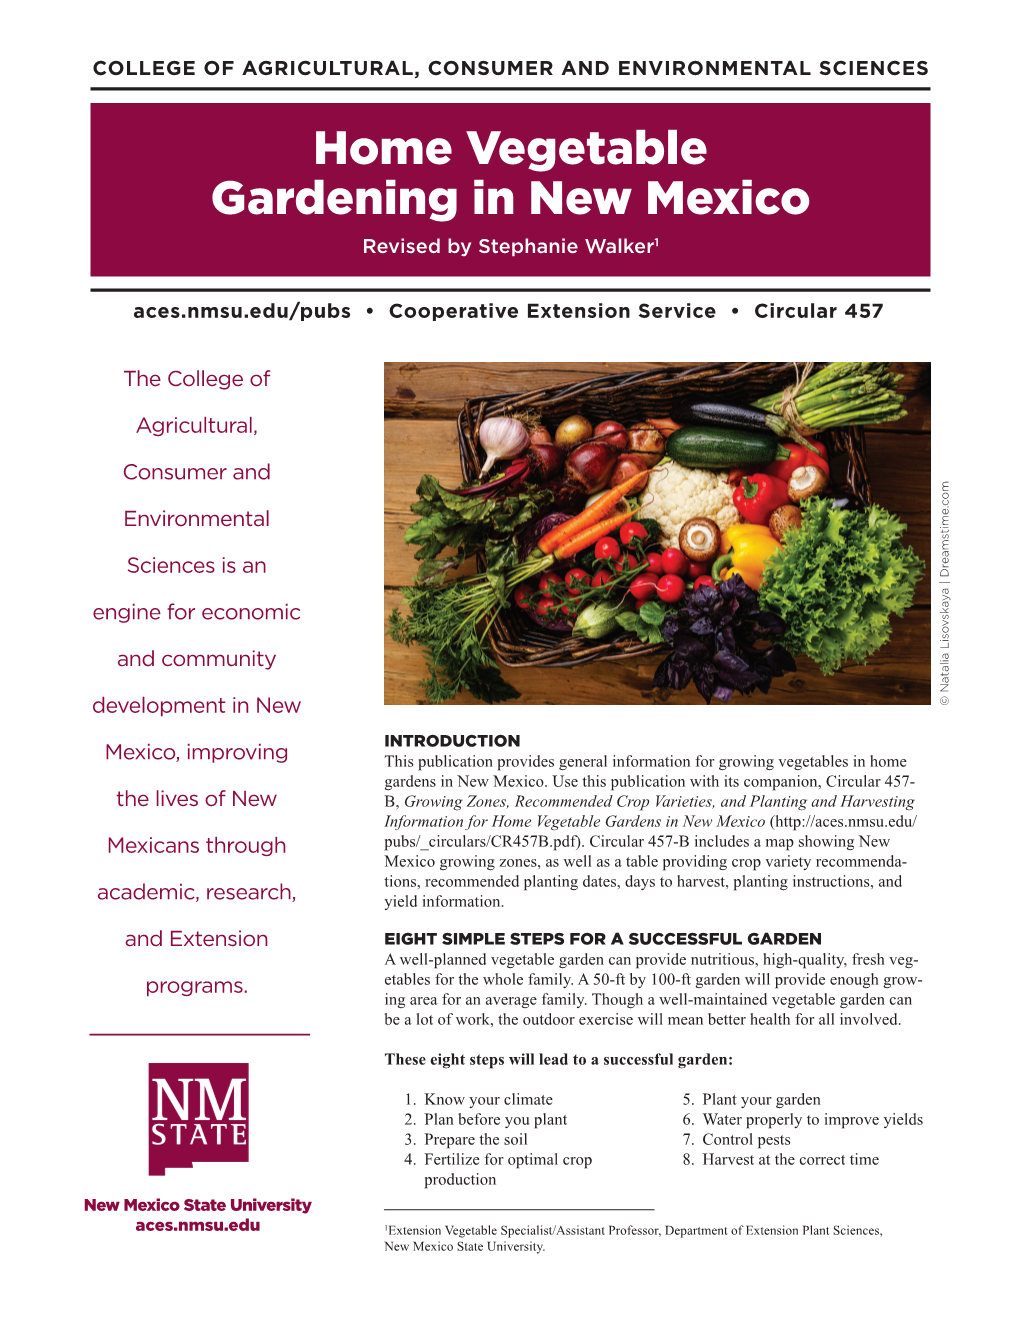 Circular 457: Home Vegetable Gardening in New Mexico